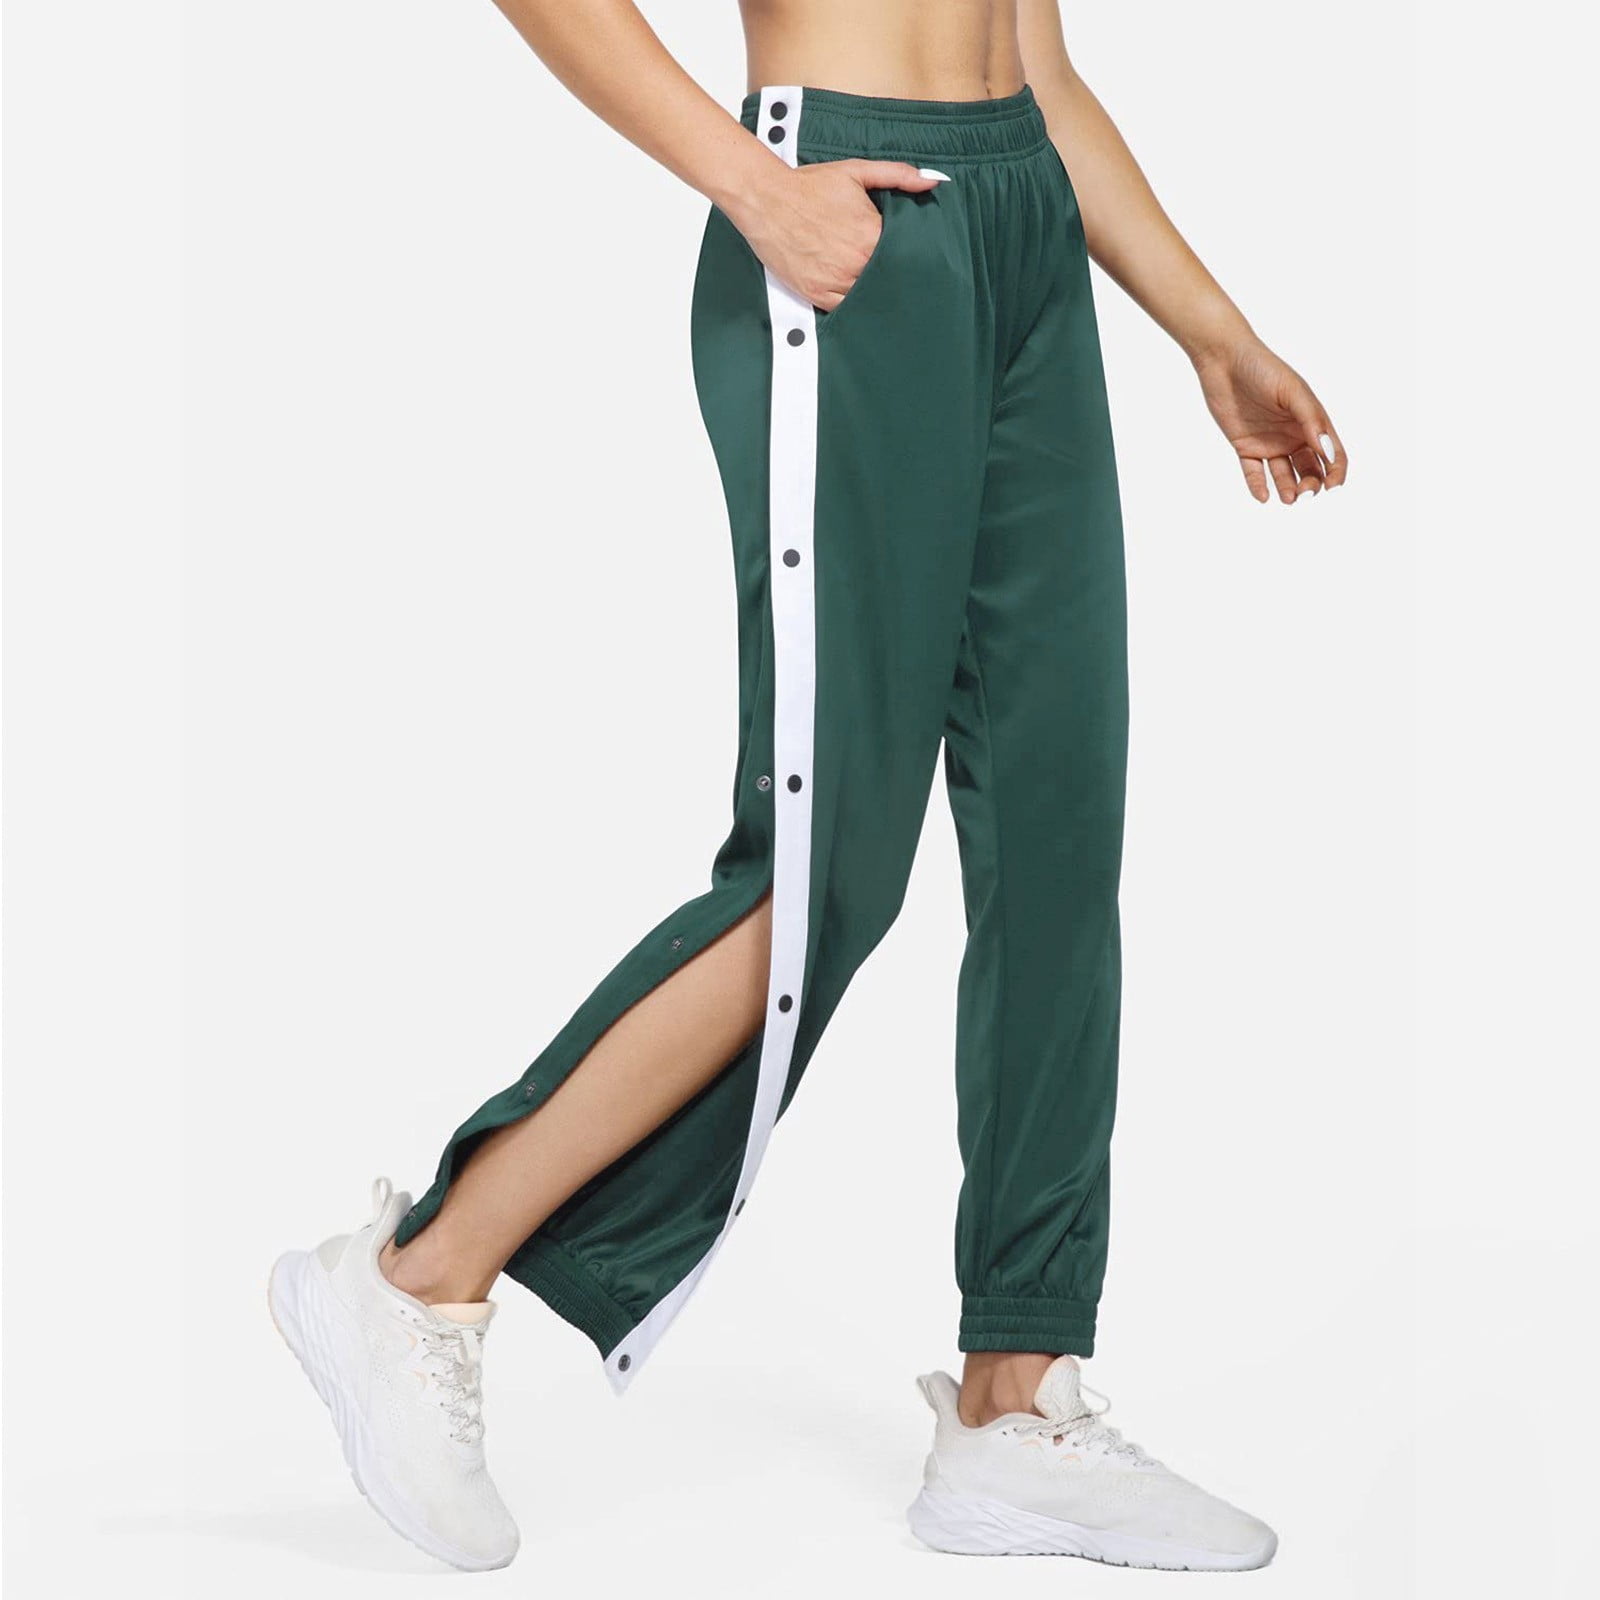 Women's Pant Women's Tear Away Warm Up Pants Active Workout Tapered  Sweatpants With Pockets Green XL